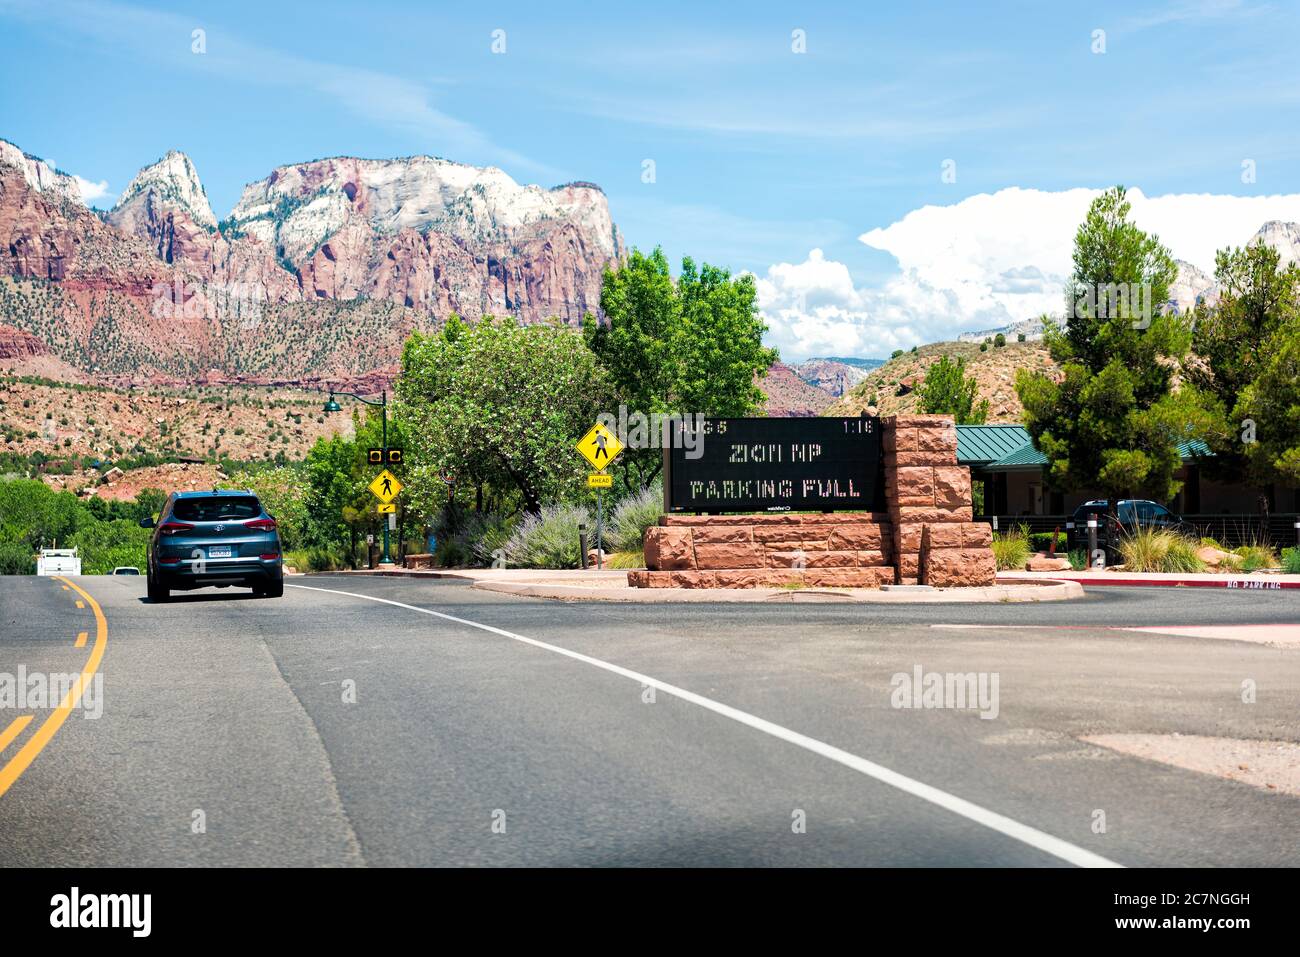 Springdale, USA - August 5, 2019: Zion National Park entrance sign with full parking lot capacity on road in Utah and cars in road traffic point of vi Stock Photo